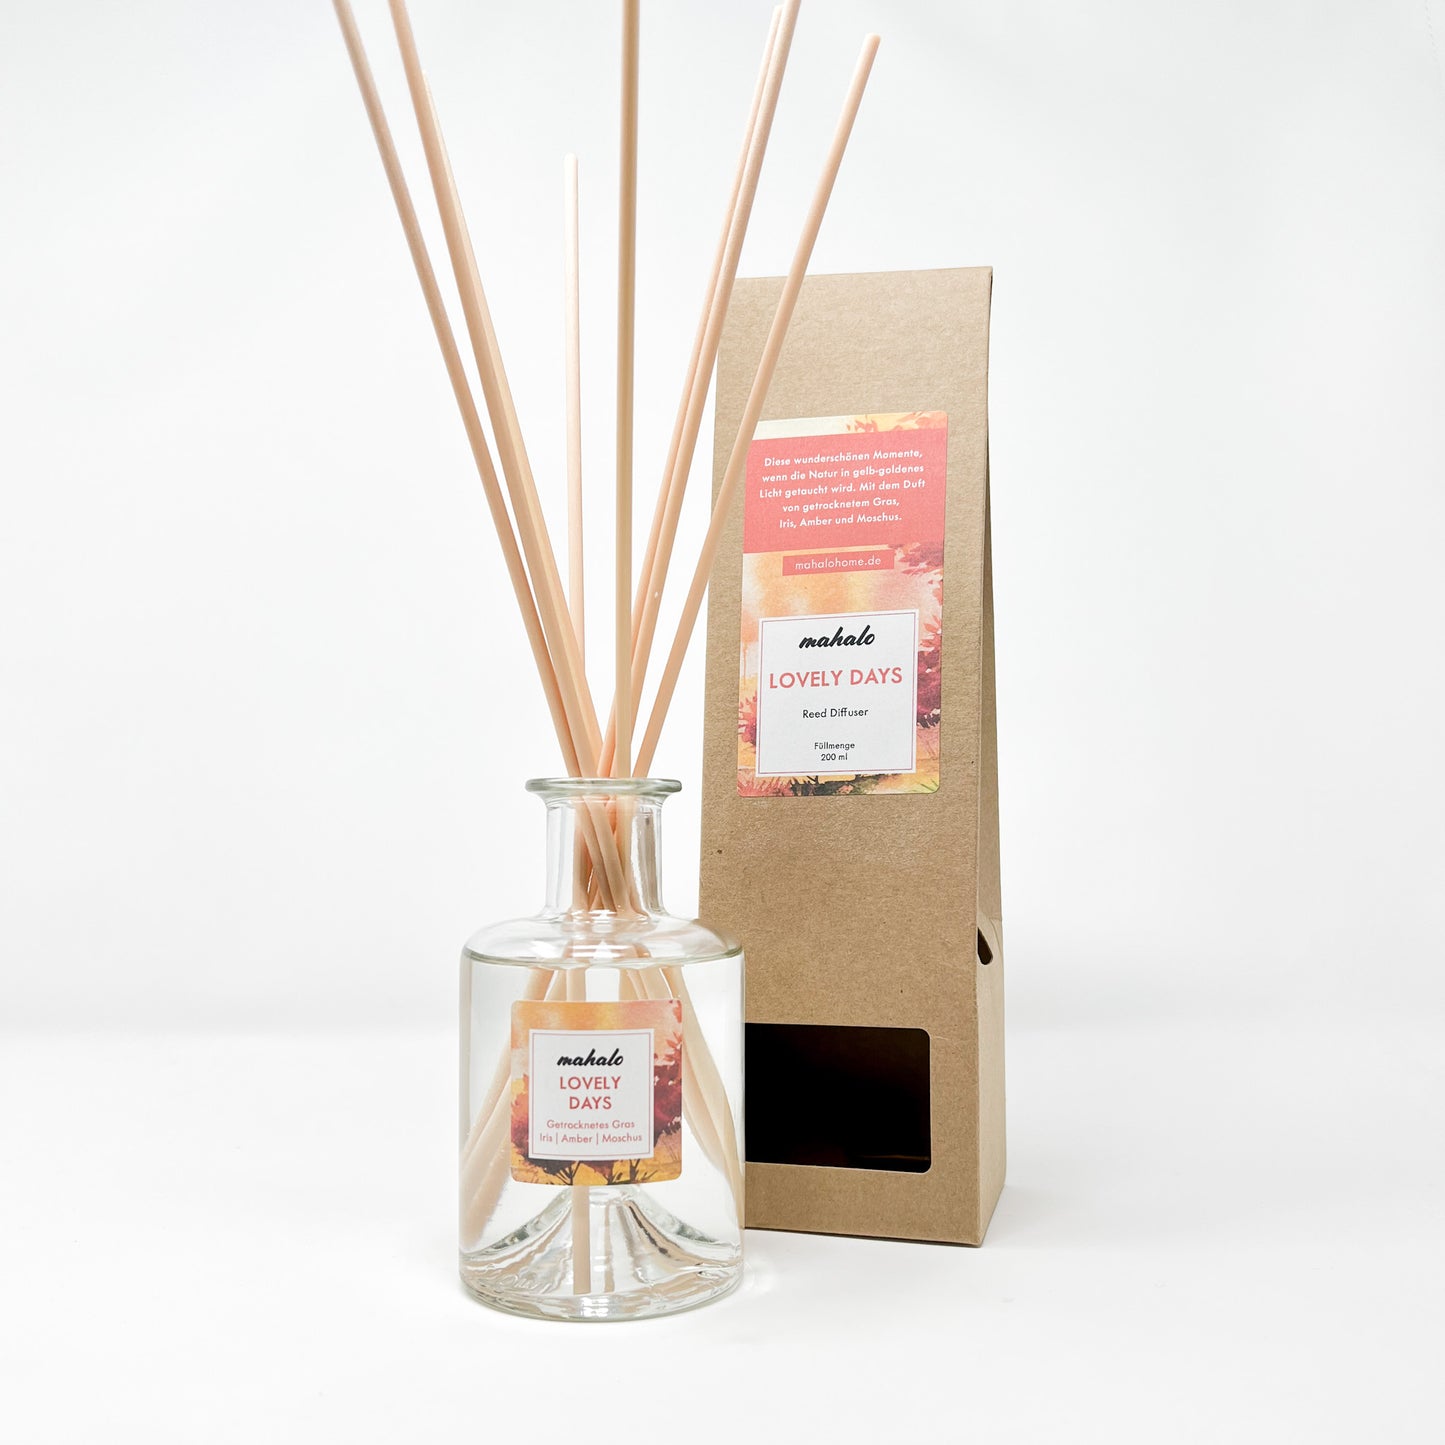 LOVELY DAYS REED DIFFUSER